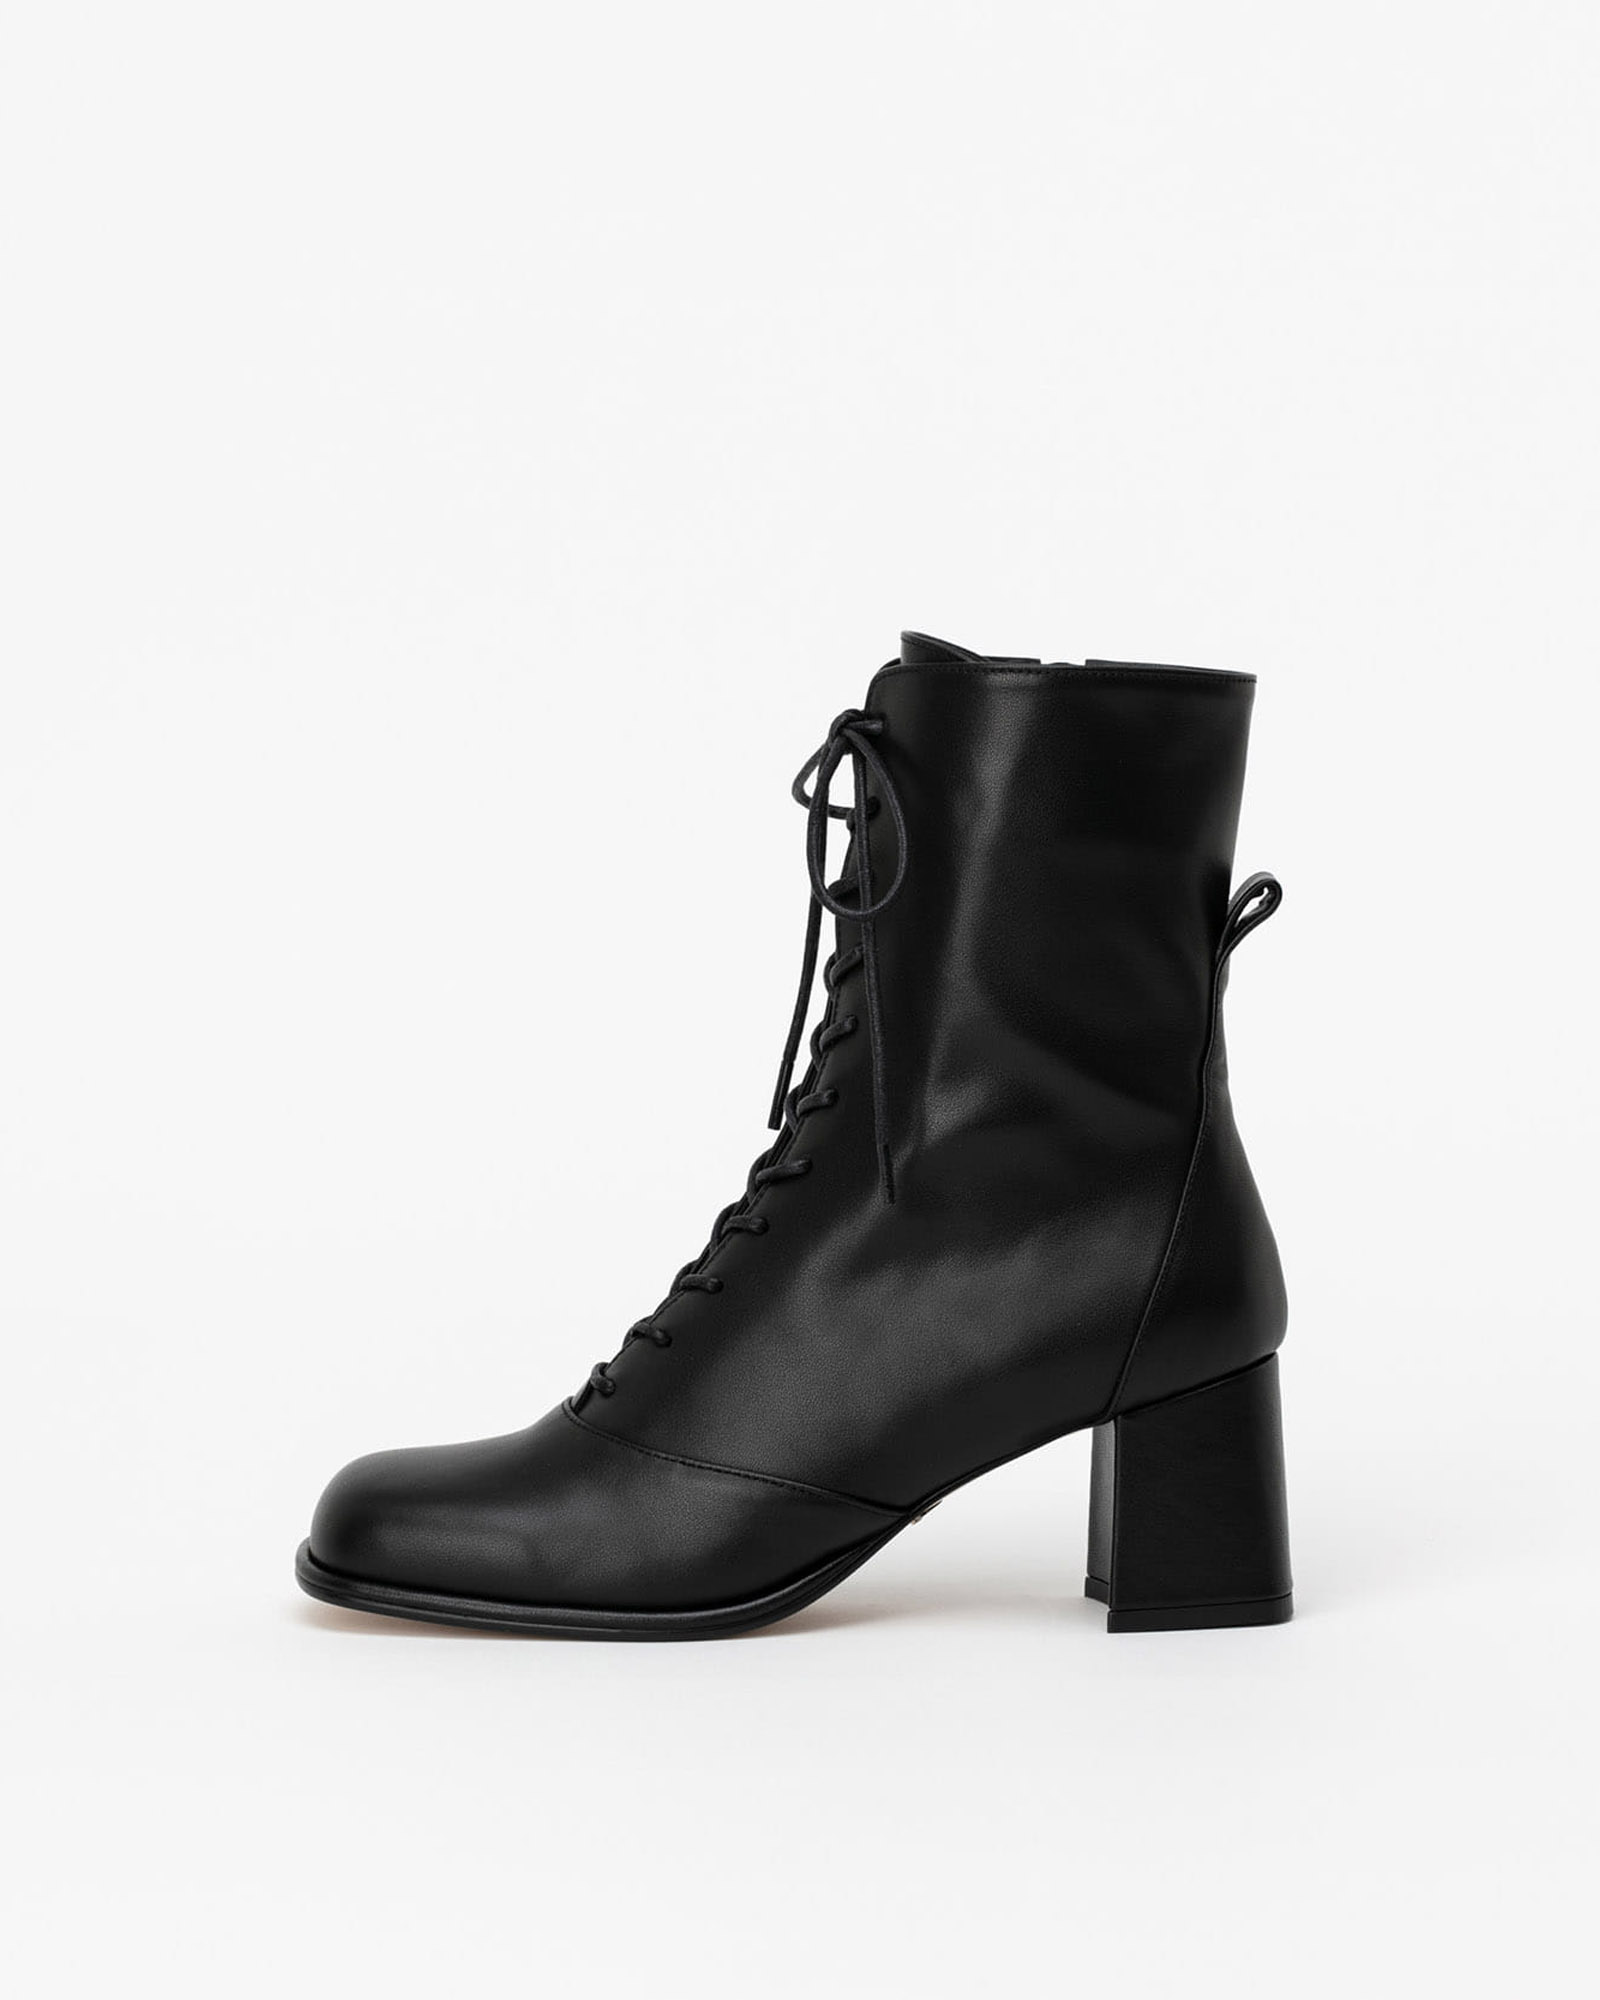 Timpani Lace-up Boots in Regular Black